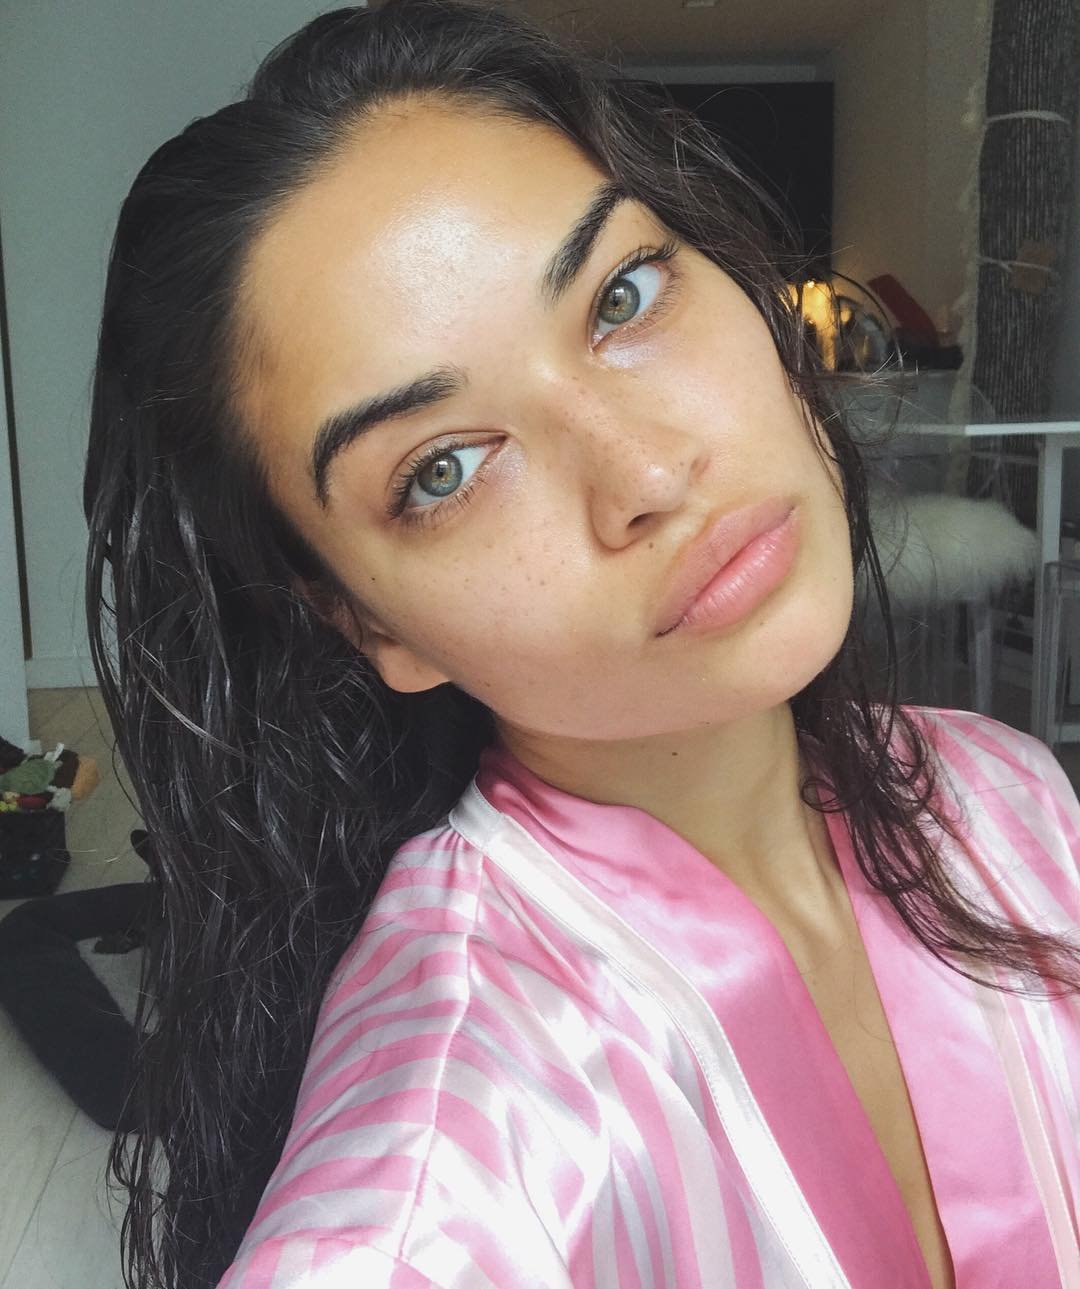 Shanina Shaik has posted a photo on Instagram with the following remarks: Twitter, 2018-12-06 16:12:09. Photo supplied by insight media. Service fee applies. NICHT ZUR VERÃFFENTLICHUNG IN BÃCHERN UND BILDBÃNDEN! EDITORIAL USE ONLY! / MAY NOT BE PUBLISHED IN BOOKS AND ILLUSTRATED BOOKS! Please note: Fees charged by the agency are for the agencyâs services only, and do not, nor are they intended to, convey to the user any ownership of Copyright or License in the material. The agency does not claim any ownership including but not limited to Copyright or License in the attached material. By publishing this material you expressly agree to indemnify and to hold the agency and its directors, shareholders and employees harmless from any loss, claims, damages, demands, expenses (including legal fees), or any causes of action or allegation against the agency arising out of or connected in any way with publication of the material., Image: 400904410, License: Rights-managed, Restrictions: NICHT ZUR VERÃFFENTLICHUNG IN BÃCHERN UND BILDBÃNDEN! Please note additional conditions in the caption, Model Release: no, Credit line: Profimedia, Insight Media